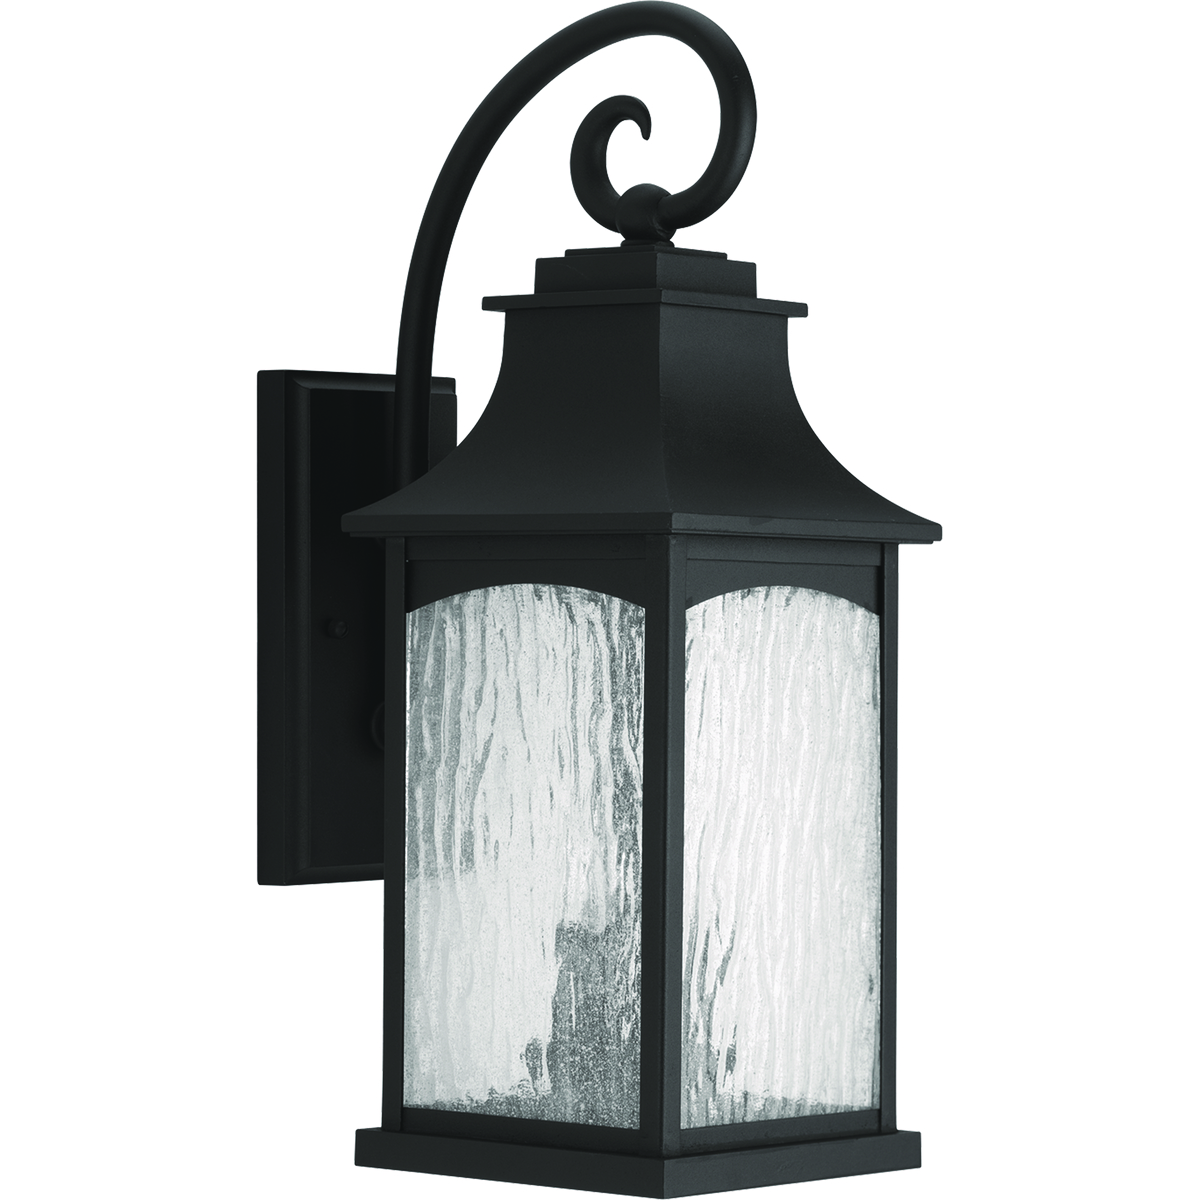 Two-light medium wall lantern in the Maison Collection offers traditional French country styling for a variety of home settings. Classic and formal clear water seeded glass complements the powder coat finish. Black finish.